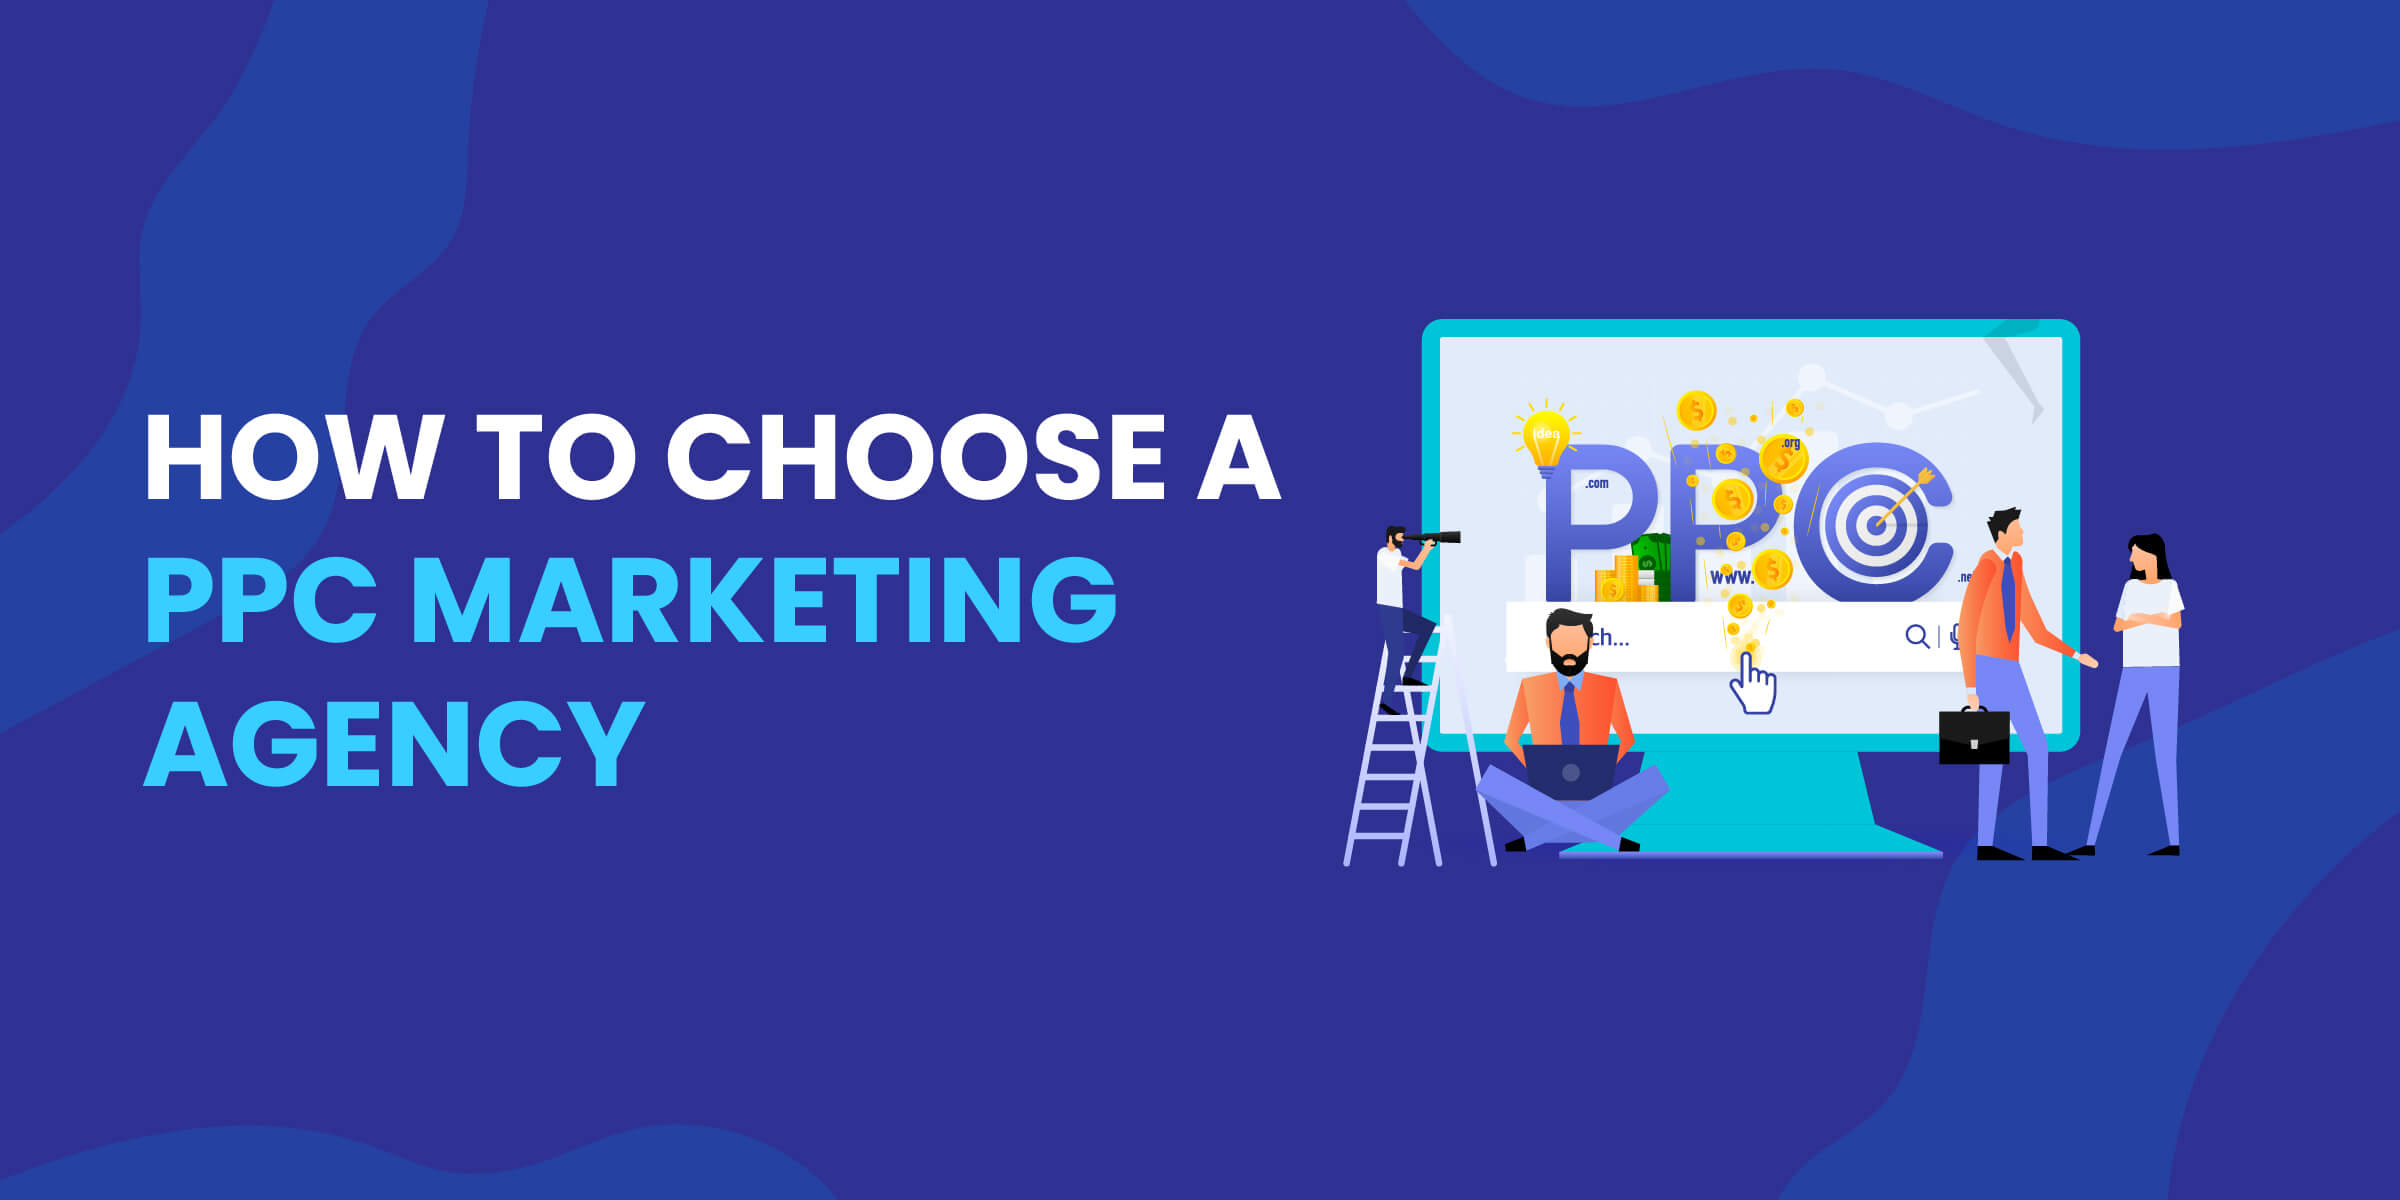 How to Choose PPC Marketing Agency